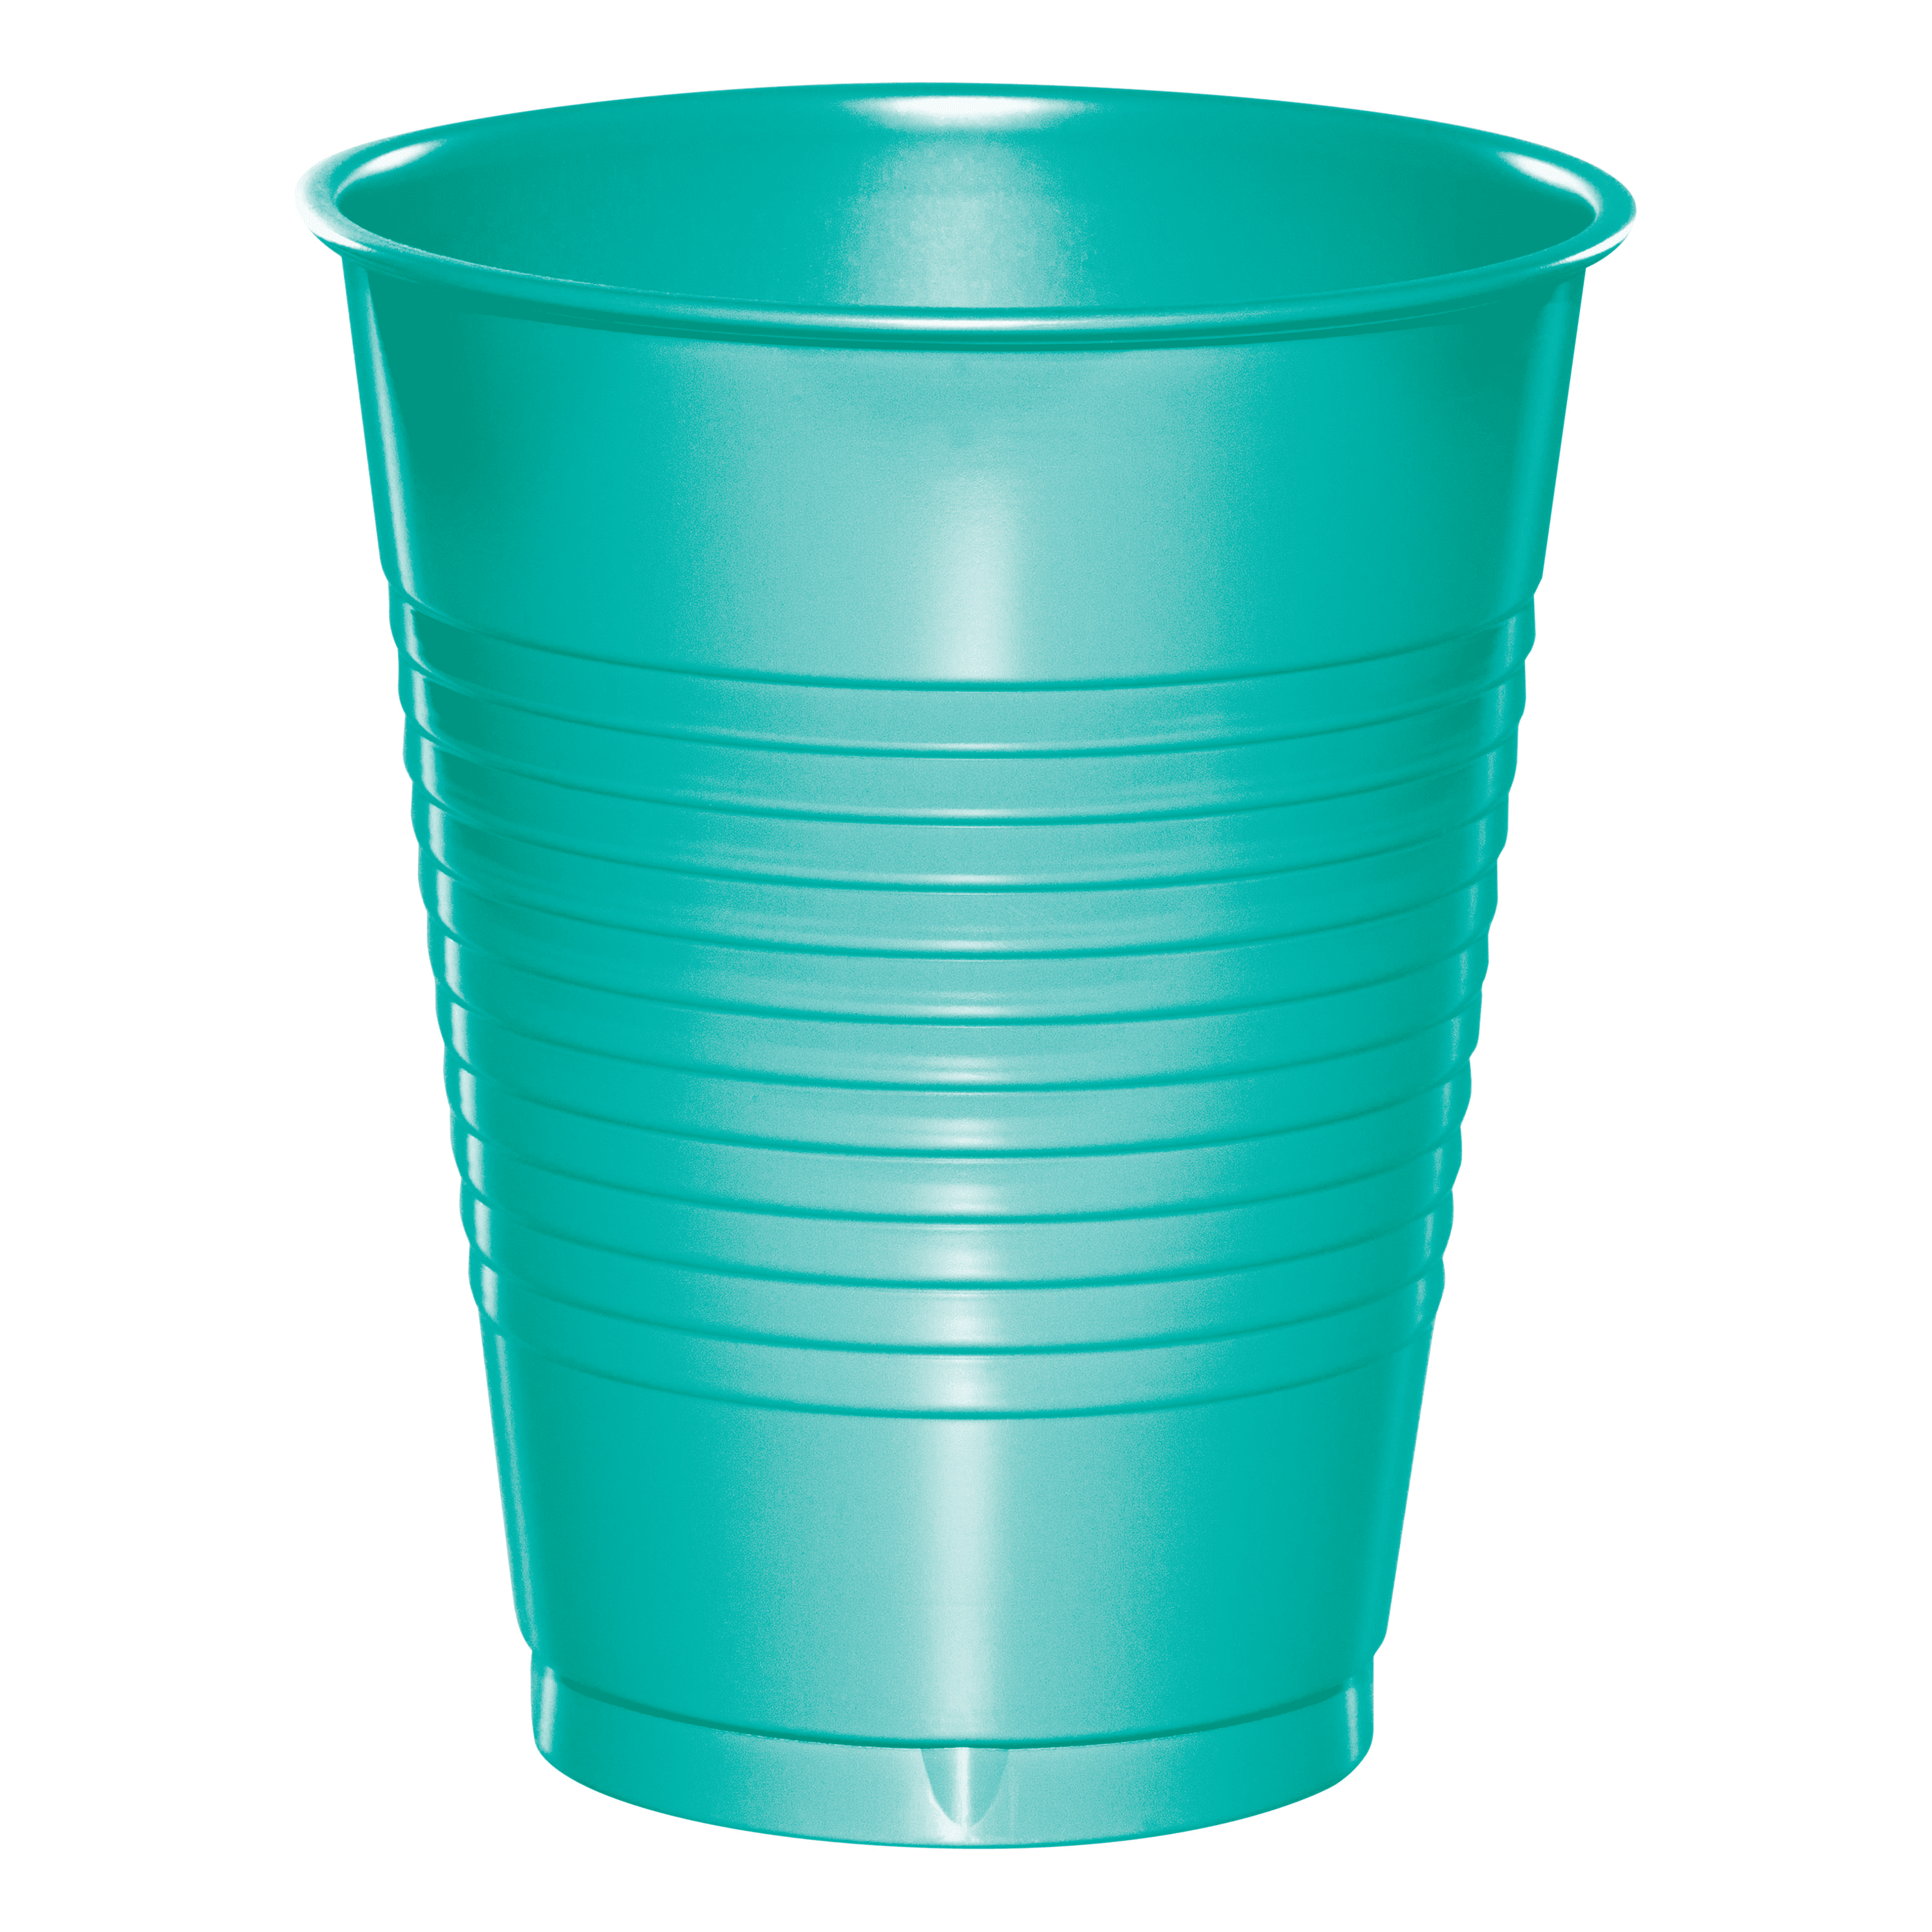 True Party Cups, Blue, 24 Pack, 16 oz